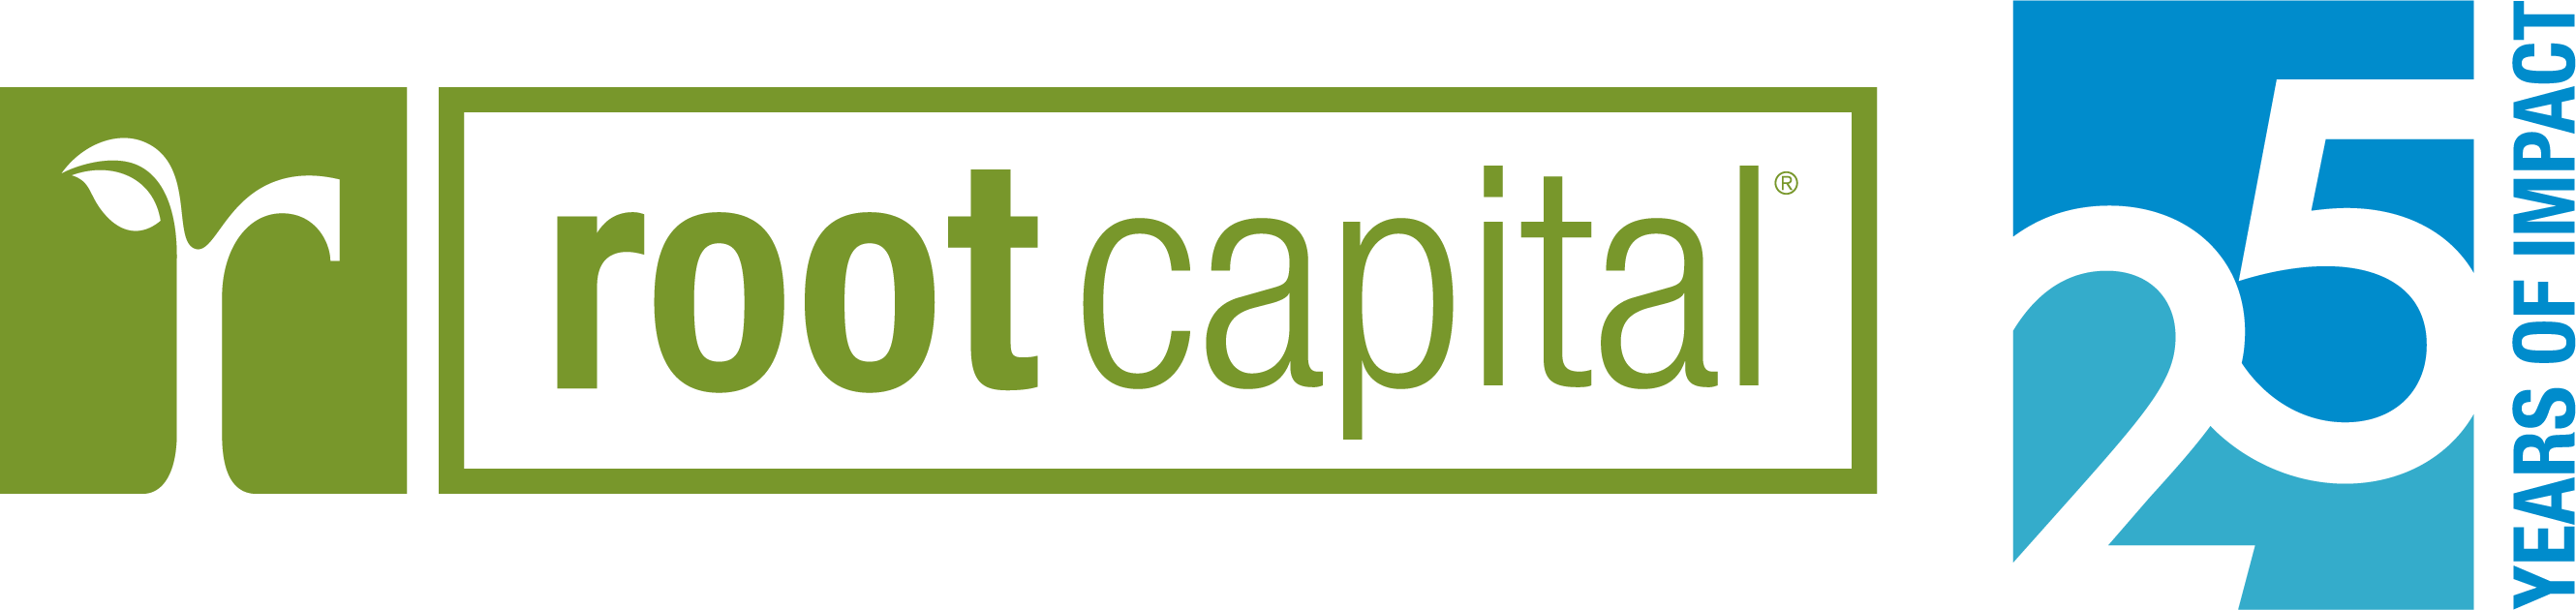 RootCapital